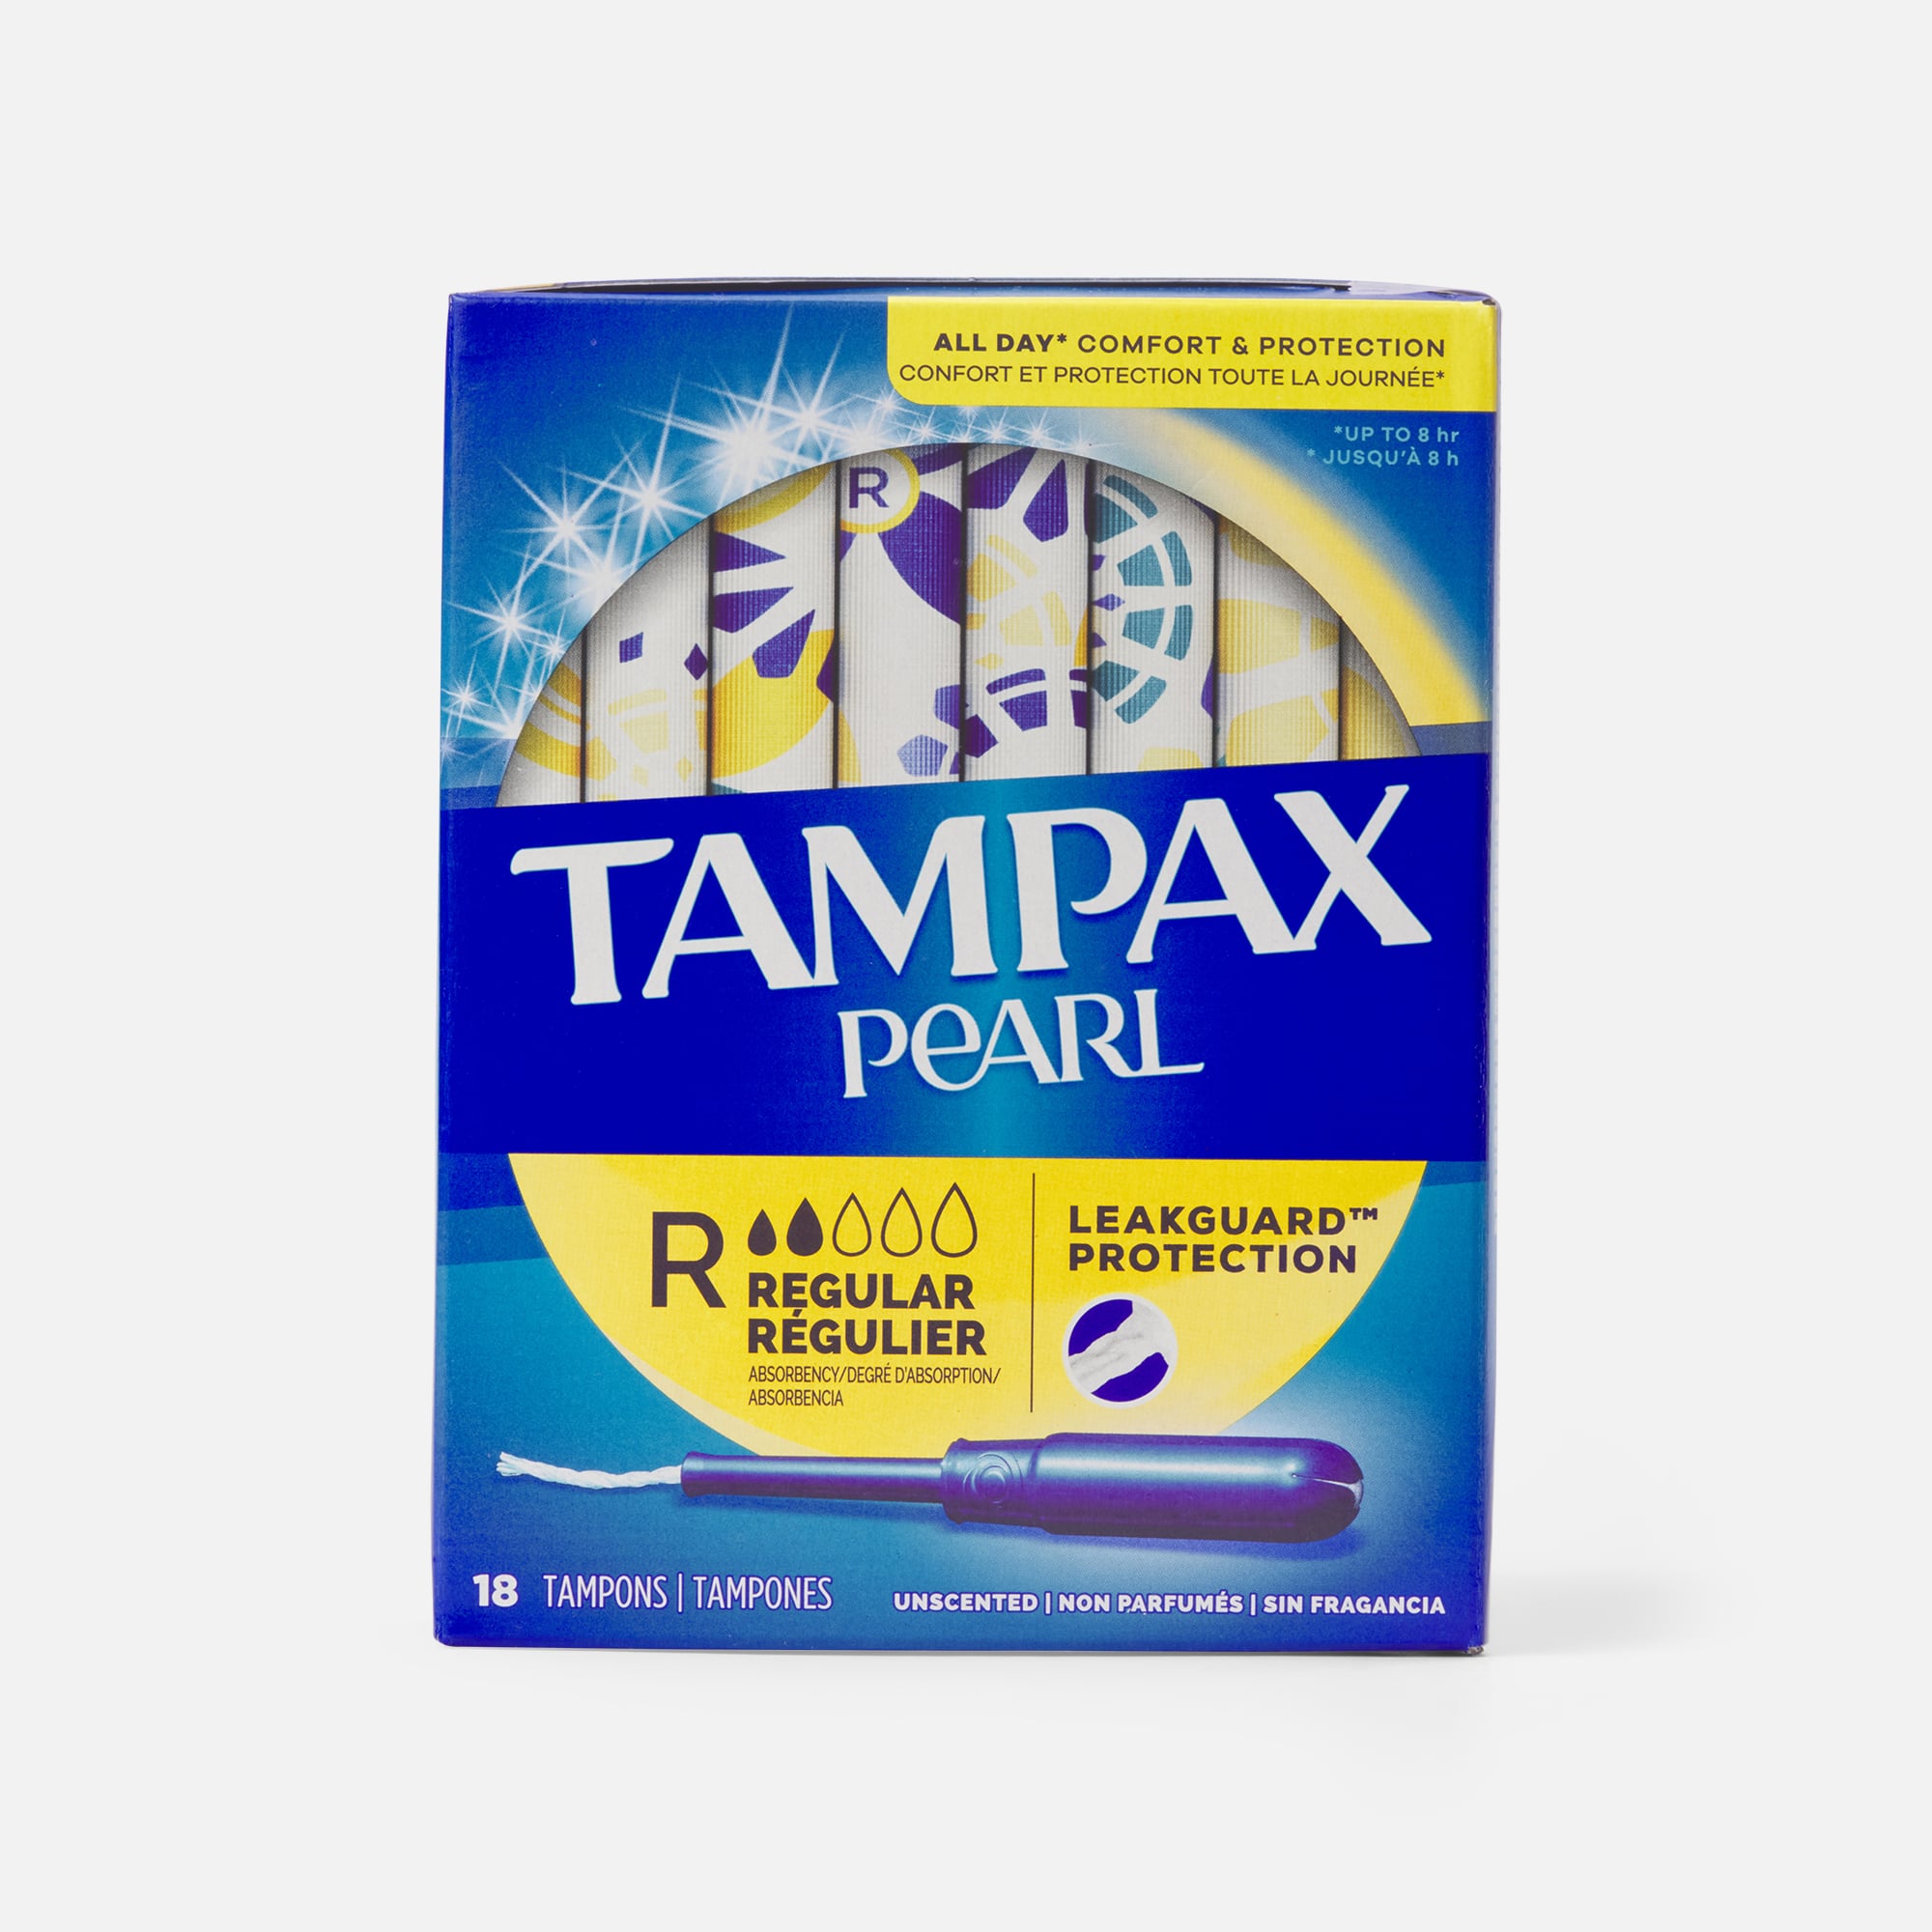 HSA Eligible  Tampax Pearl Tampons with BPA-Free Plastic